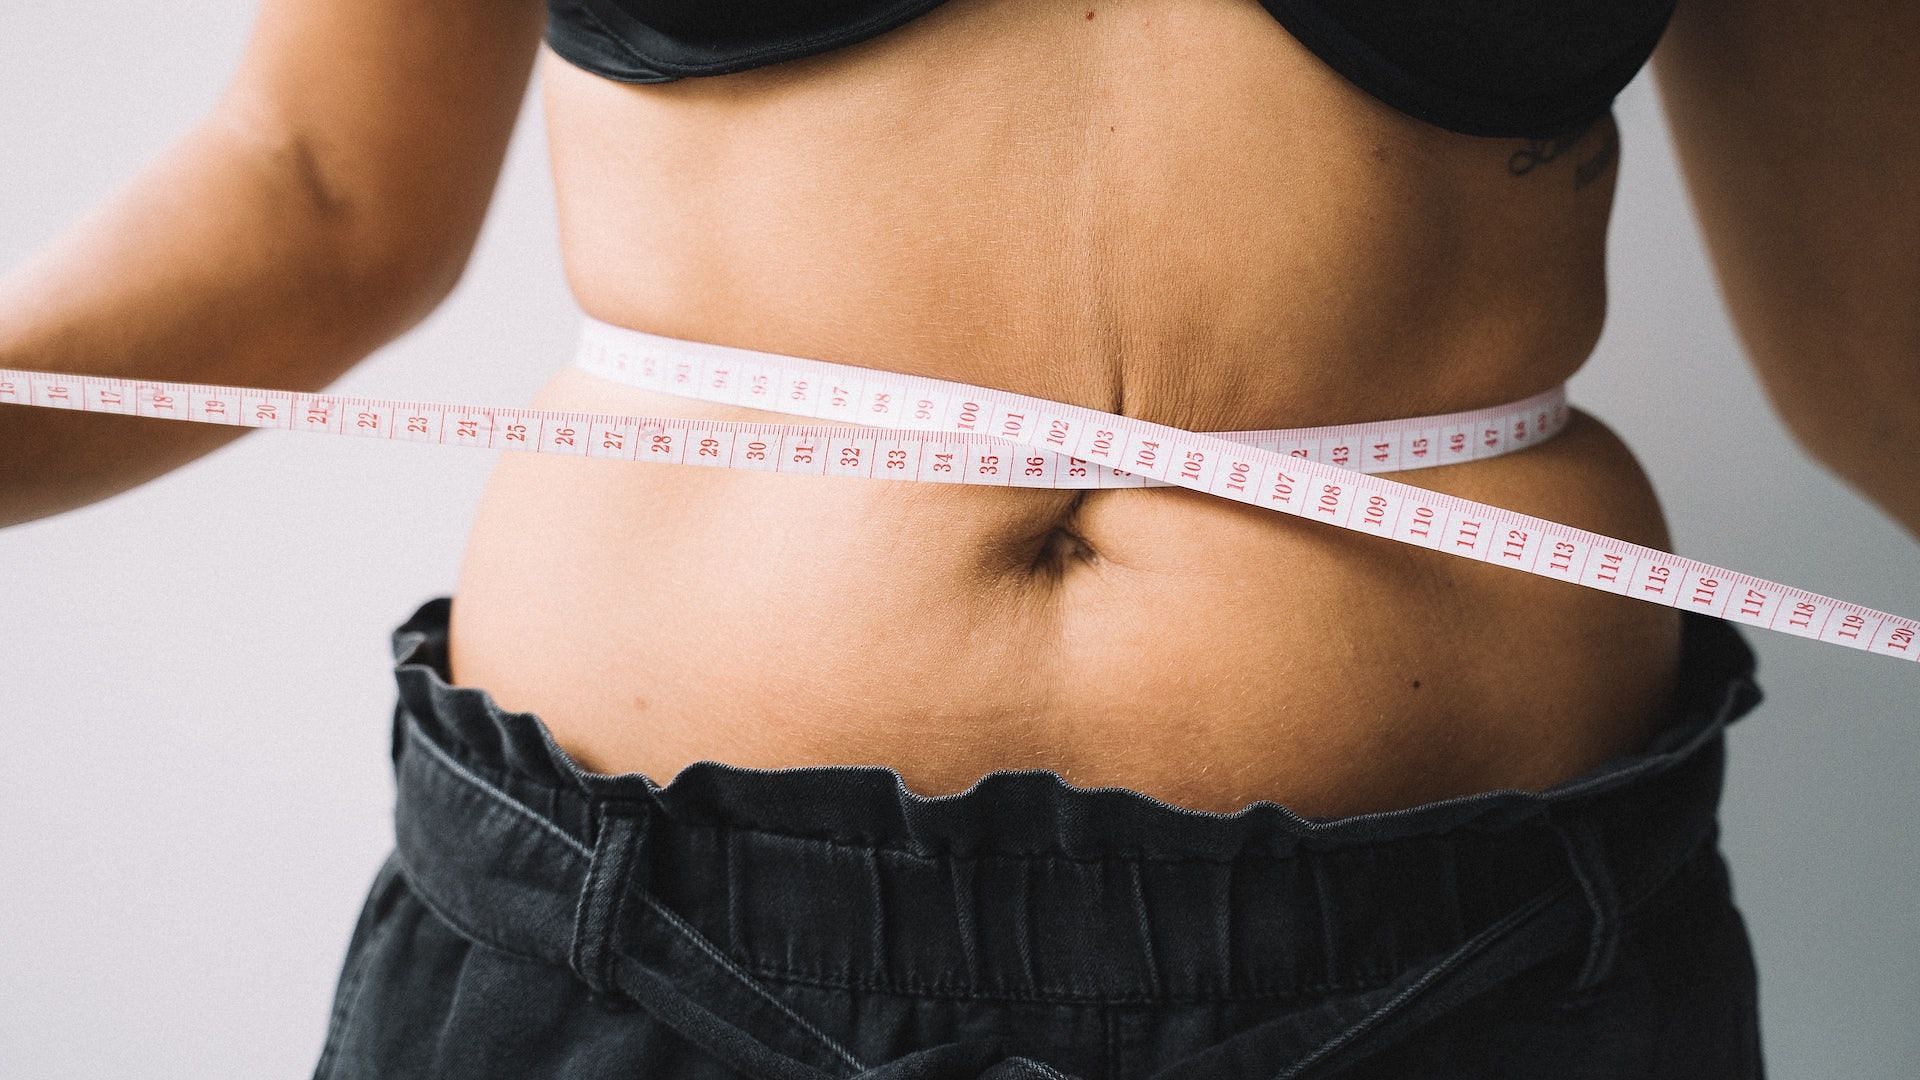 Boost your weight loss. Image via Pexels/Anna Tarazevich